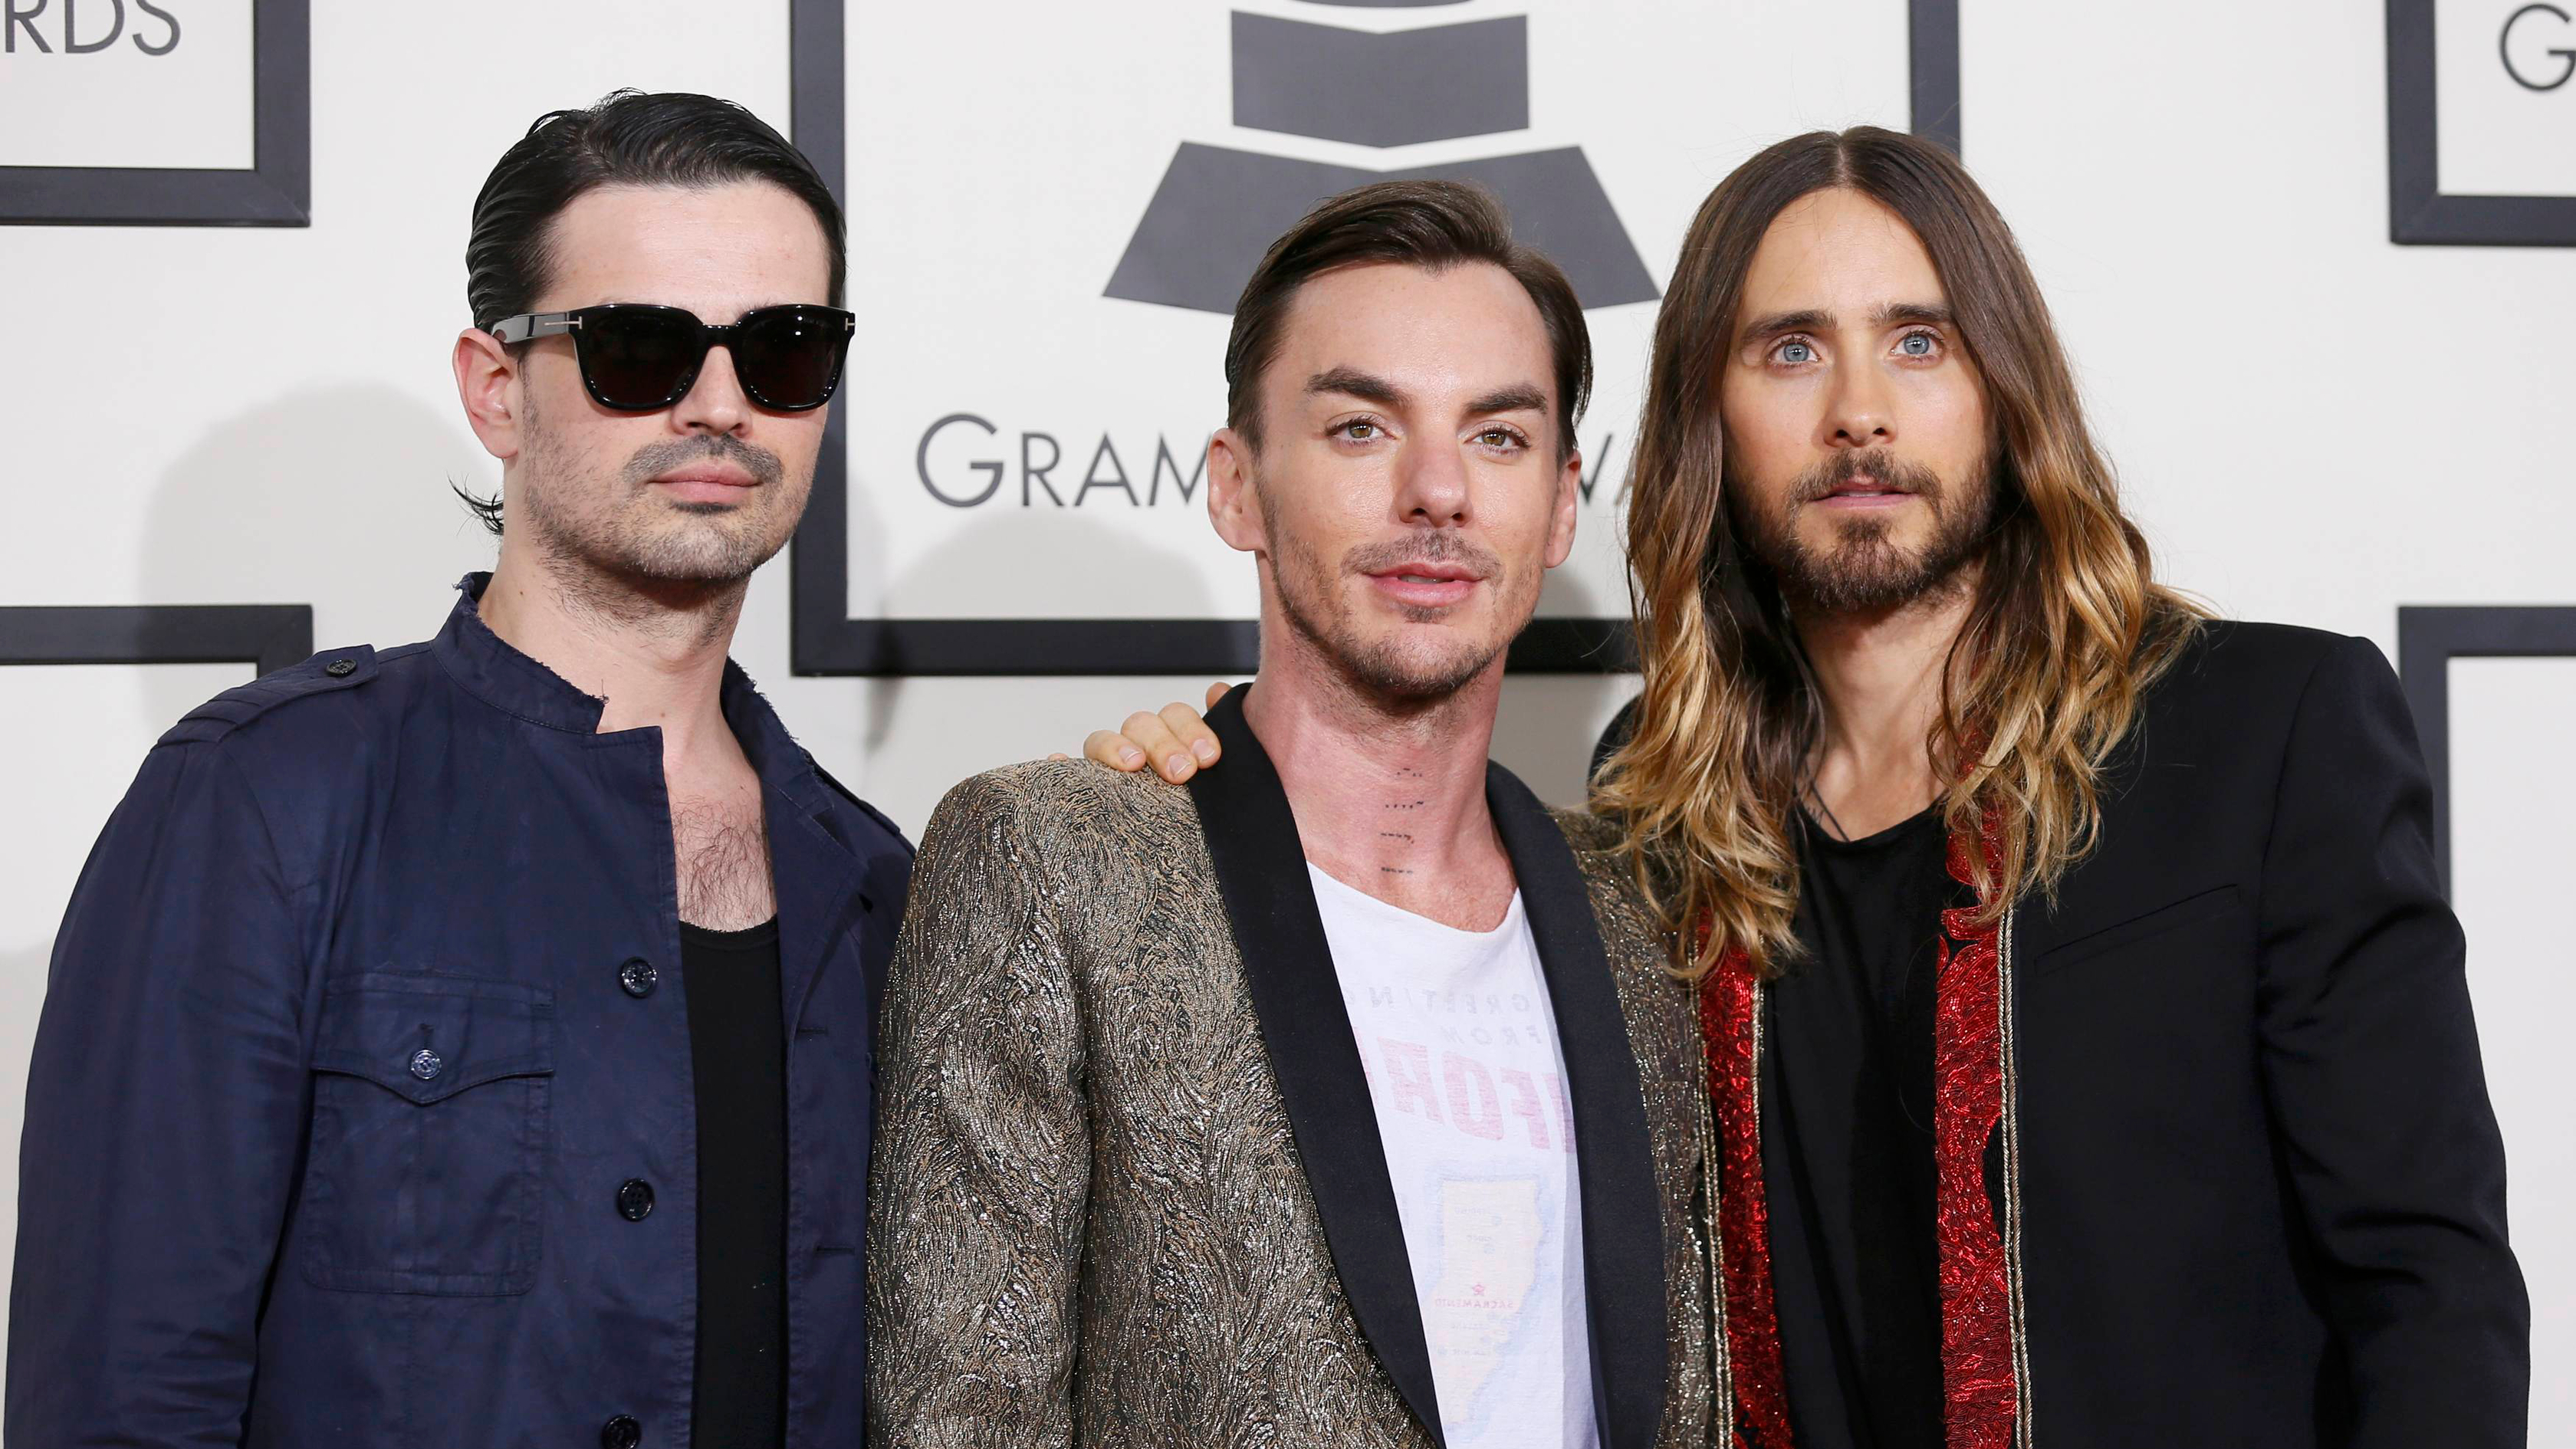 40+ Thirty Seconds to Mars HD Wallpapers and Backgrounds